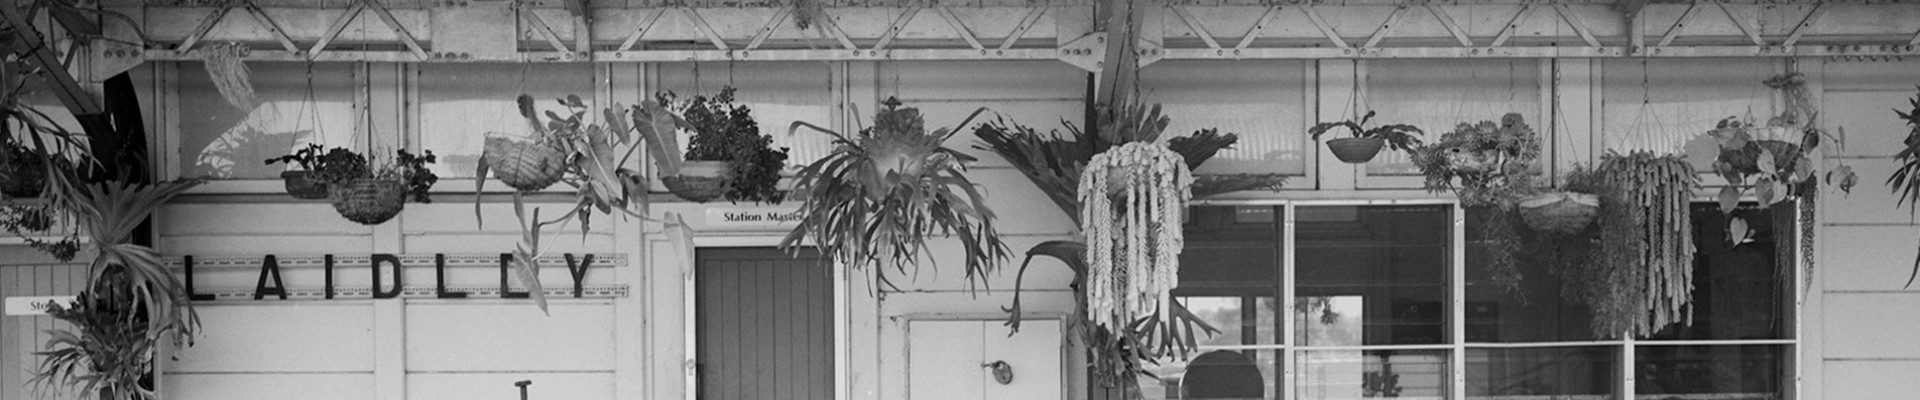 Photograph of the station building at Laidley in 1994 with hanging plants staghorns and a parcel trolley